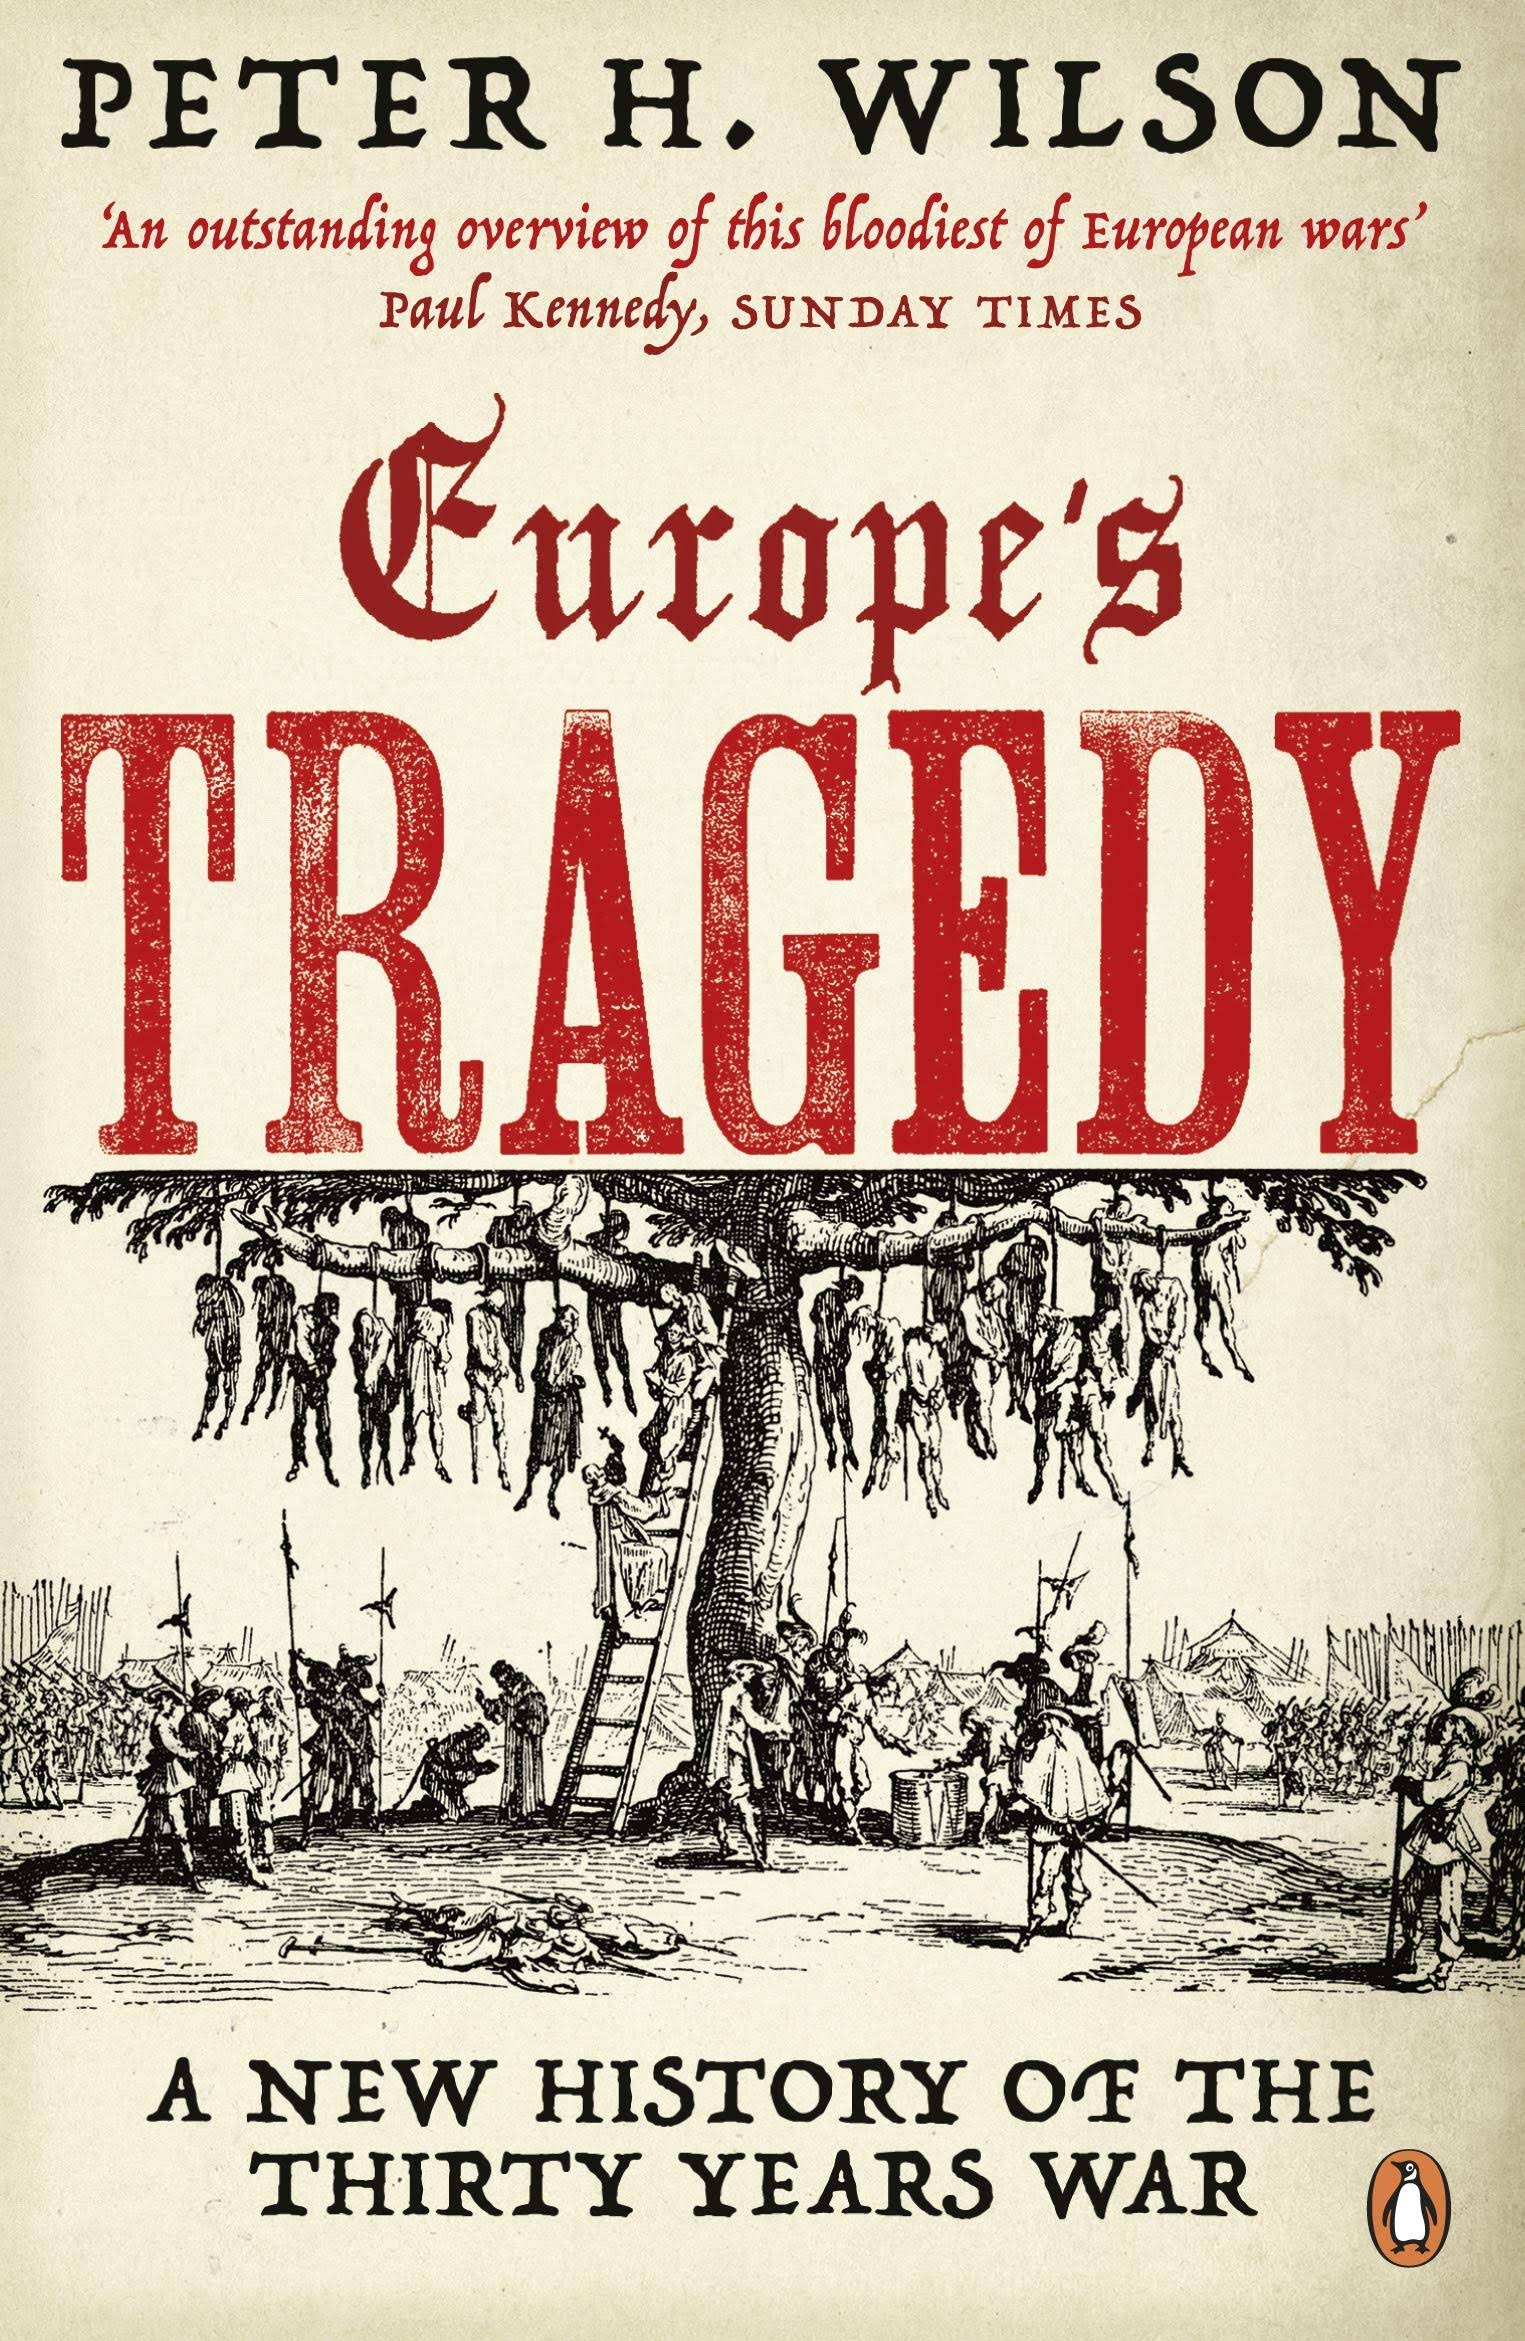 Europe's Tragedy: A New History of the Thirty Years War [Book]